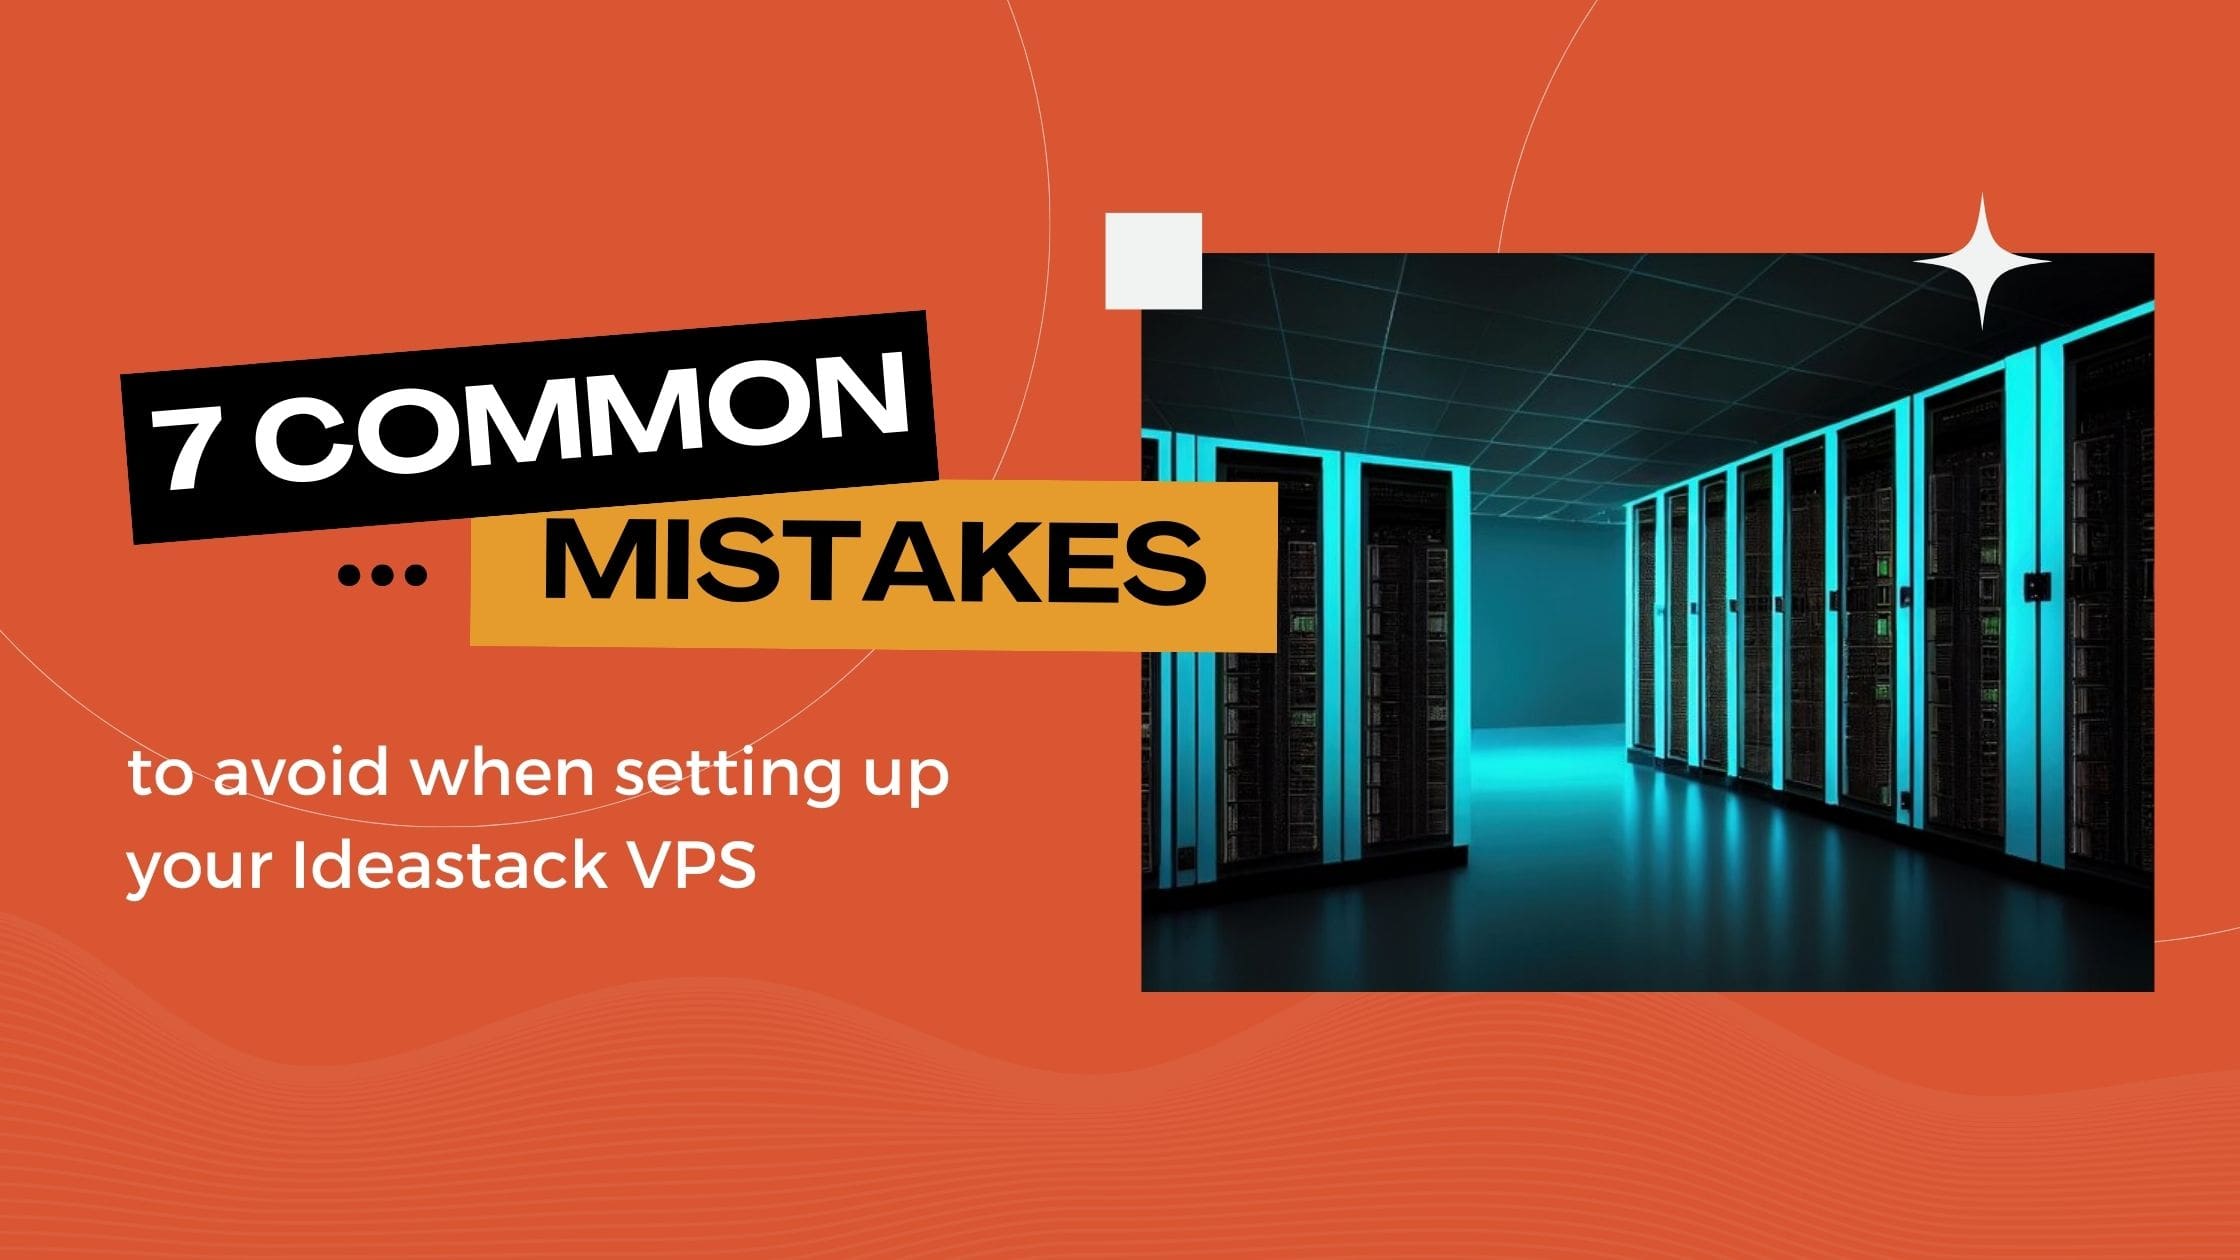 7 Common Mistakes to avoid when setting up your Ideastack VPS